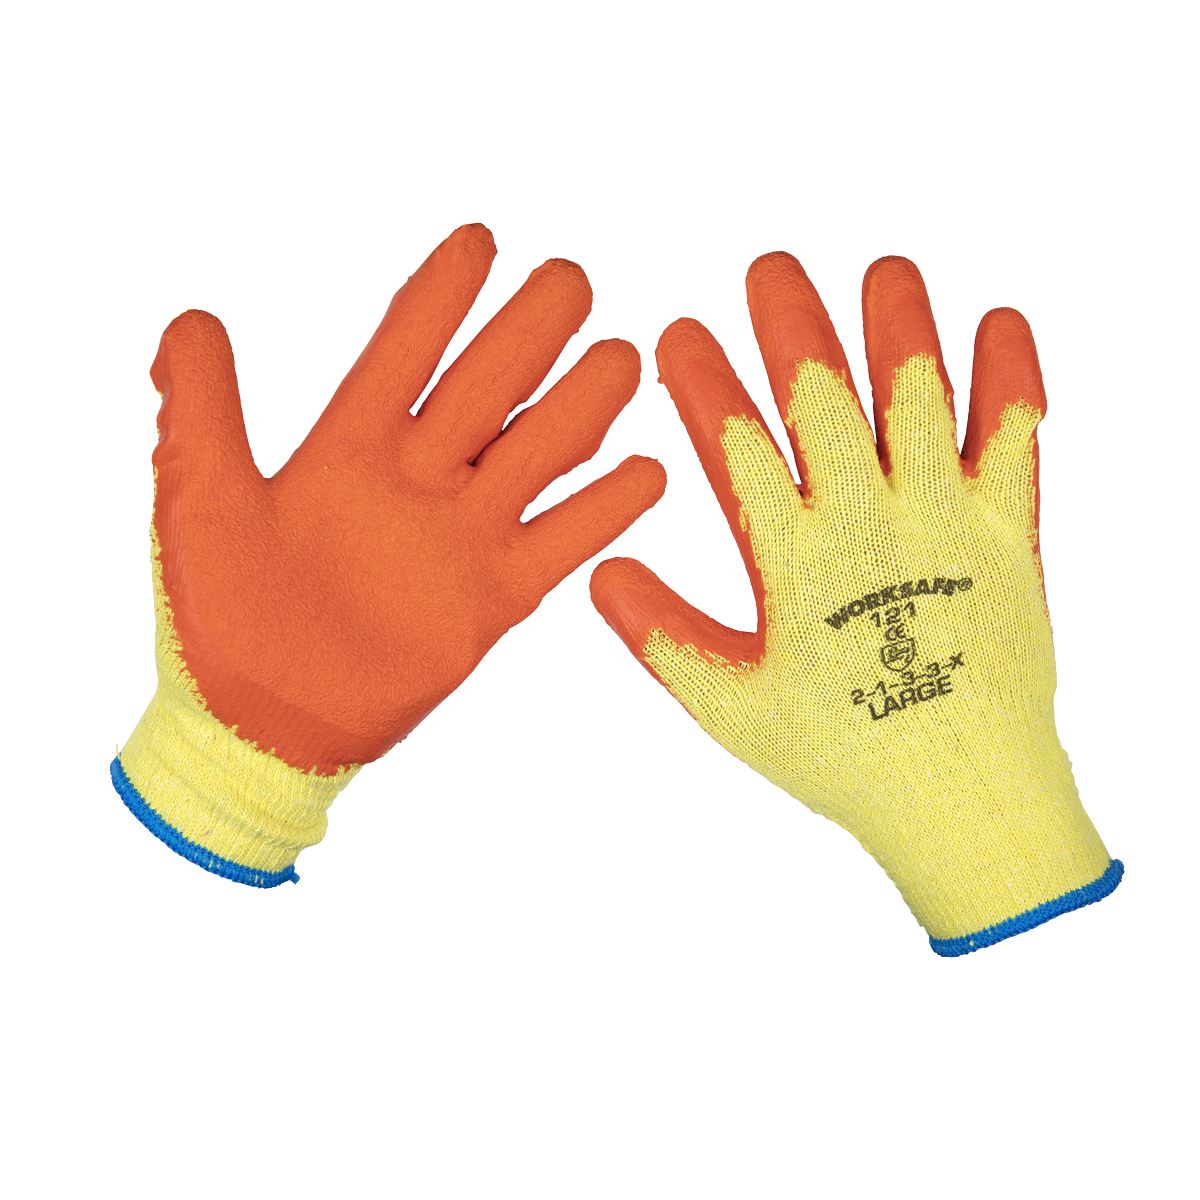 Worksafe by Sealey Super Grip Knitted Gloves Latex Palm (Large) - Pair